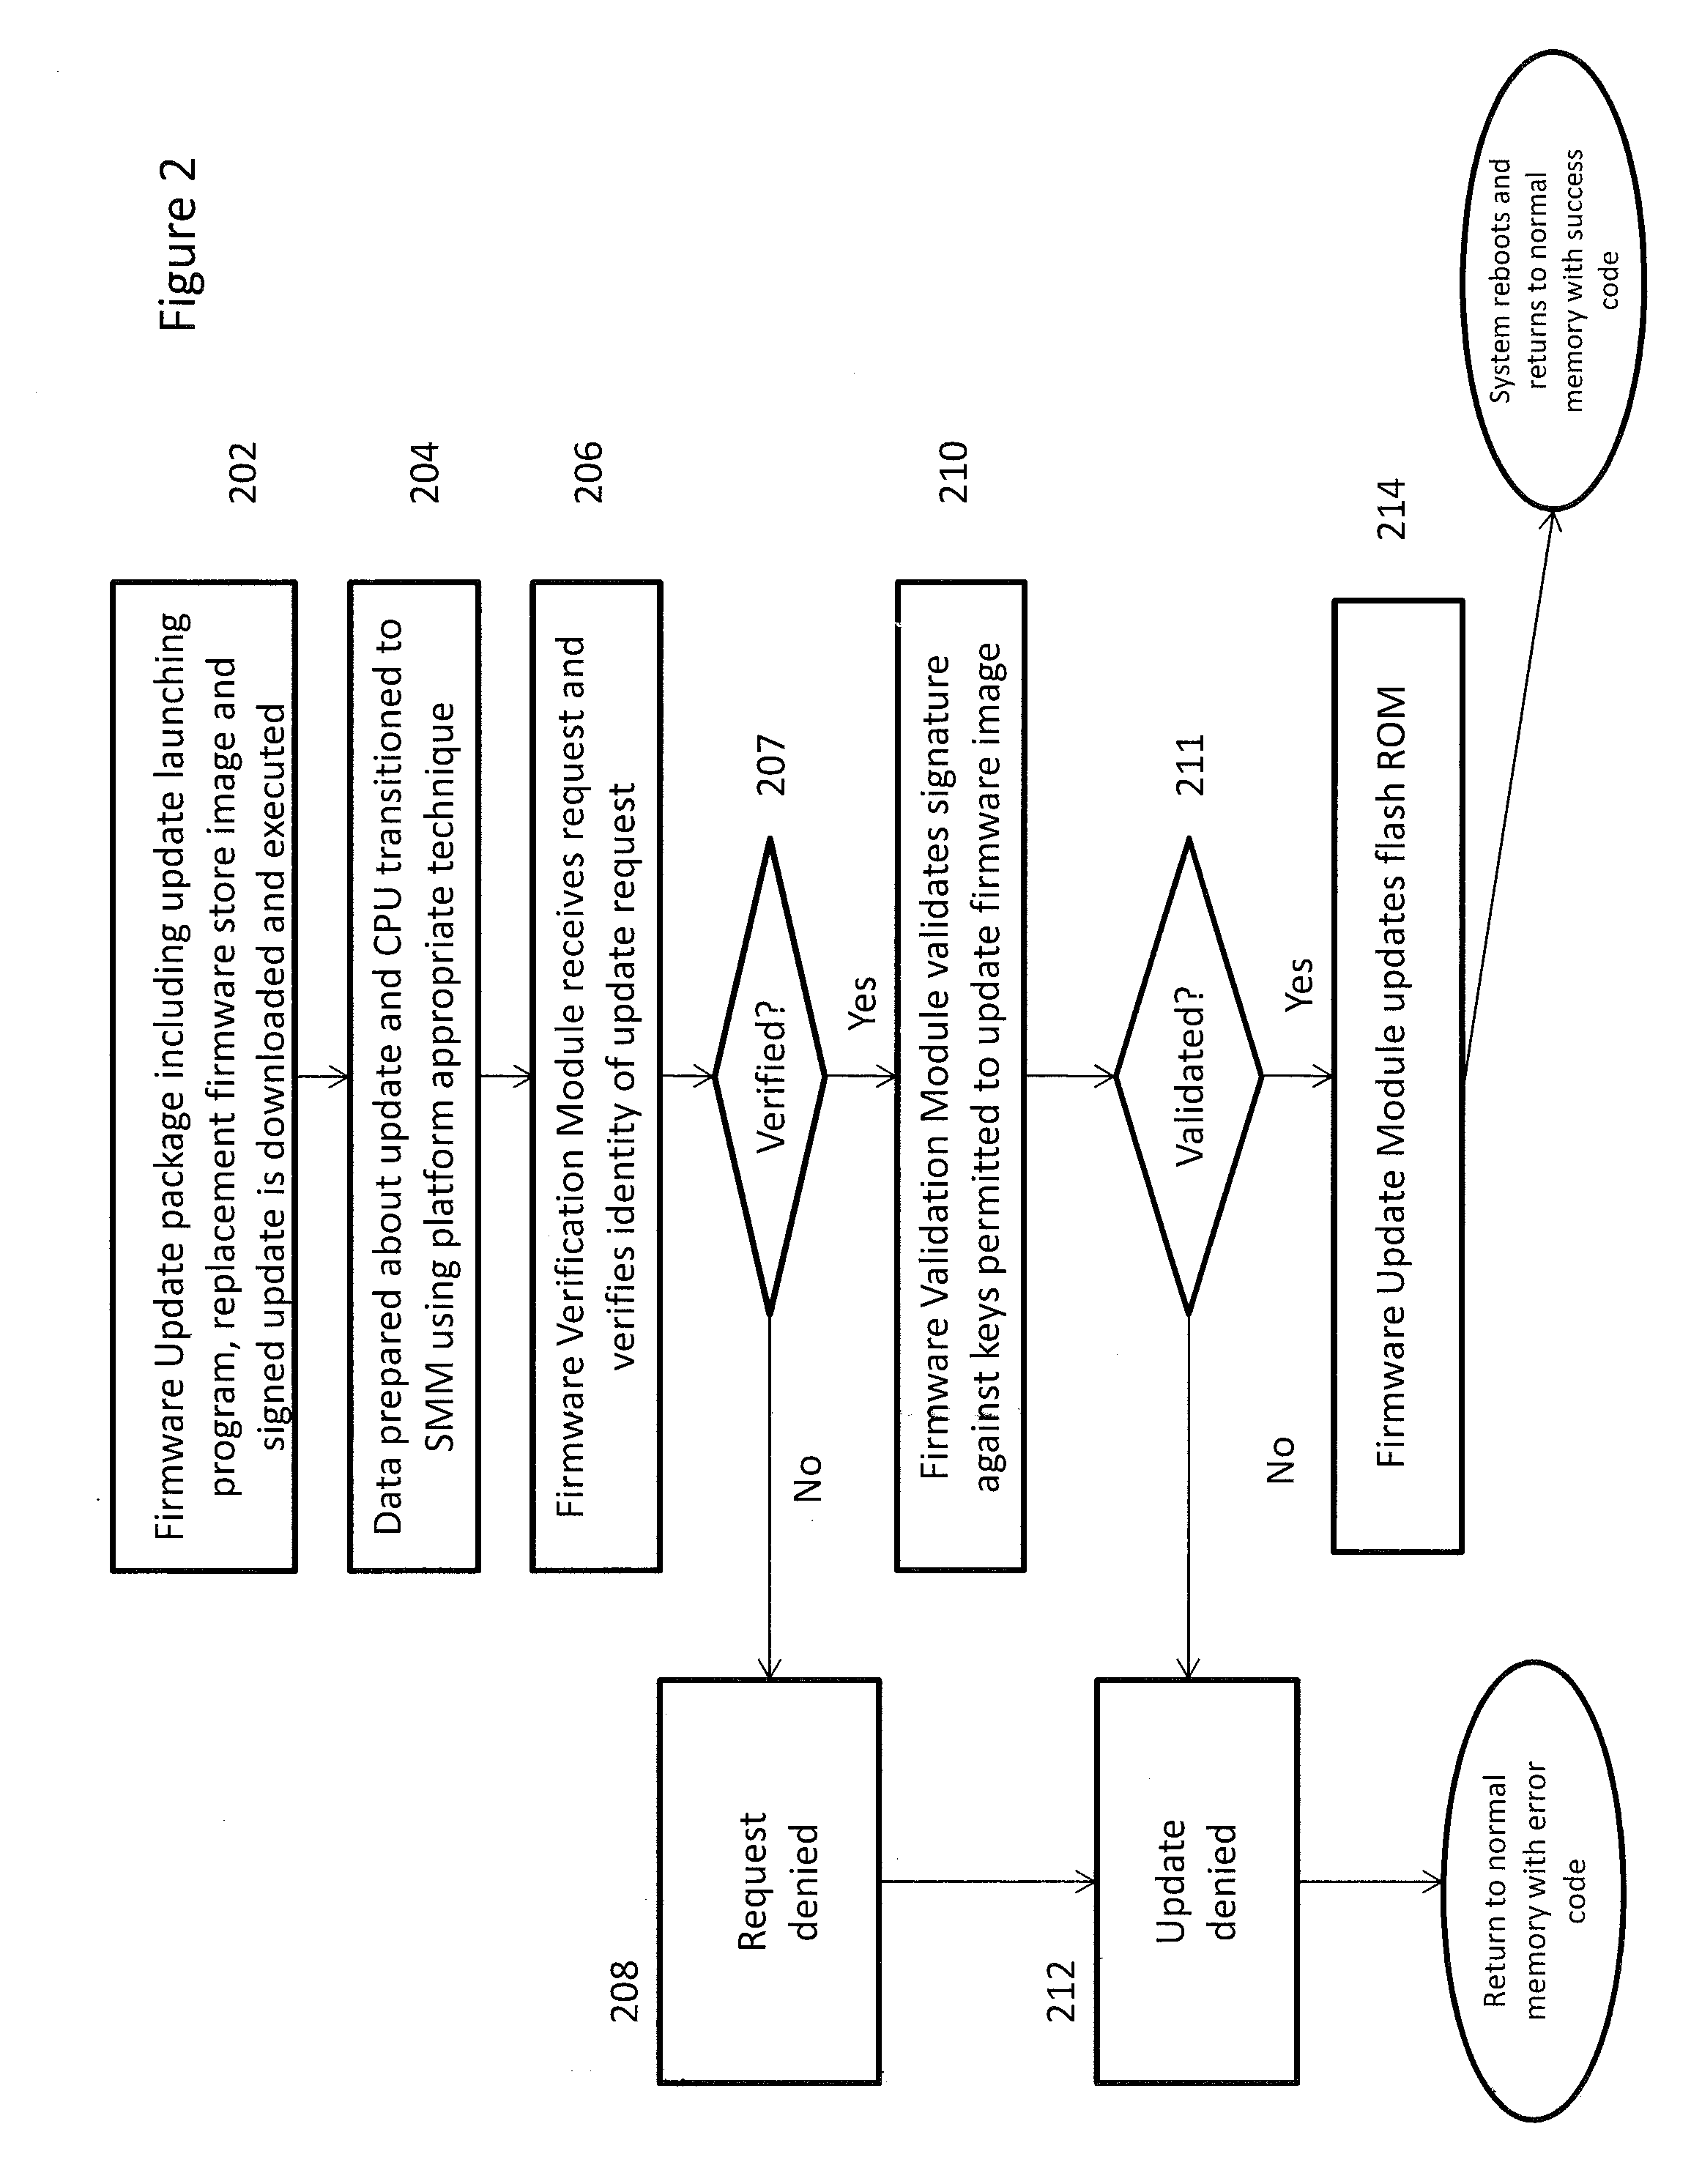 System and method for processing requests to alter system security databases and firmware stores in a unified extensible firmware interface-compliant computing device